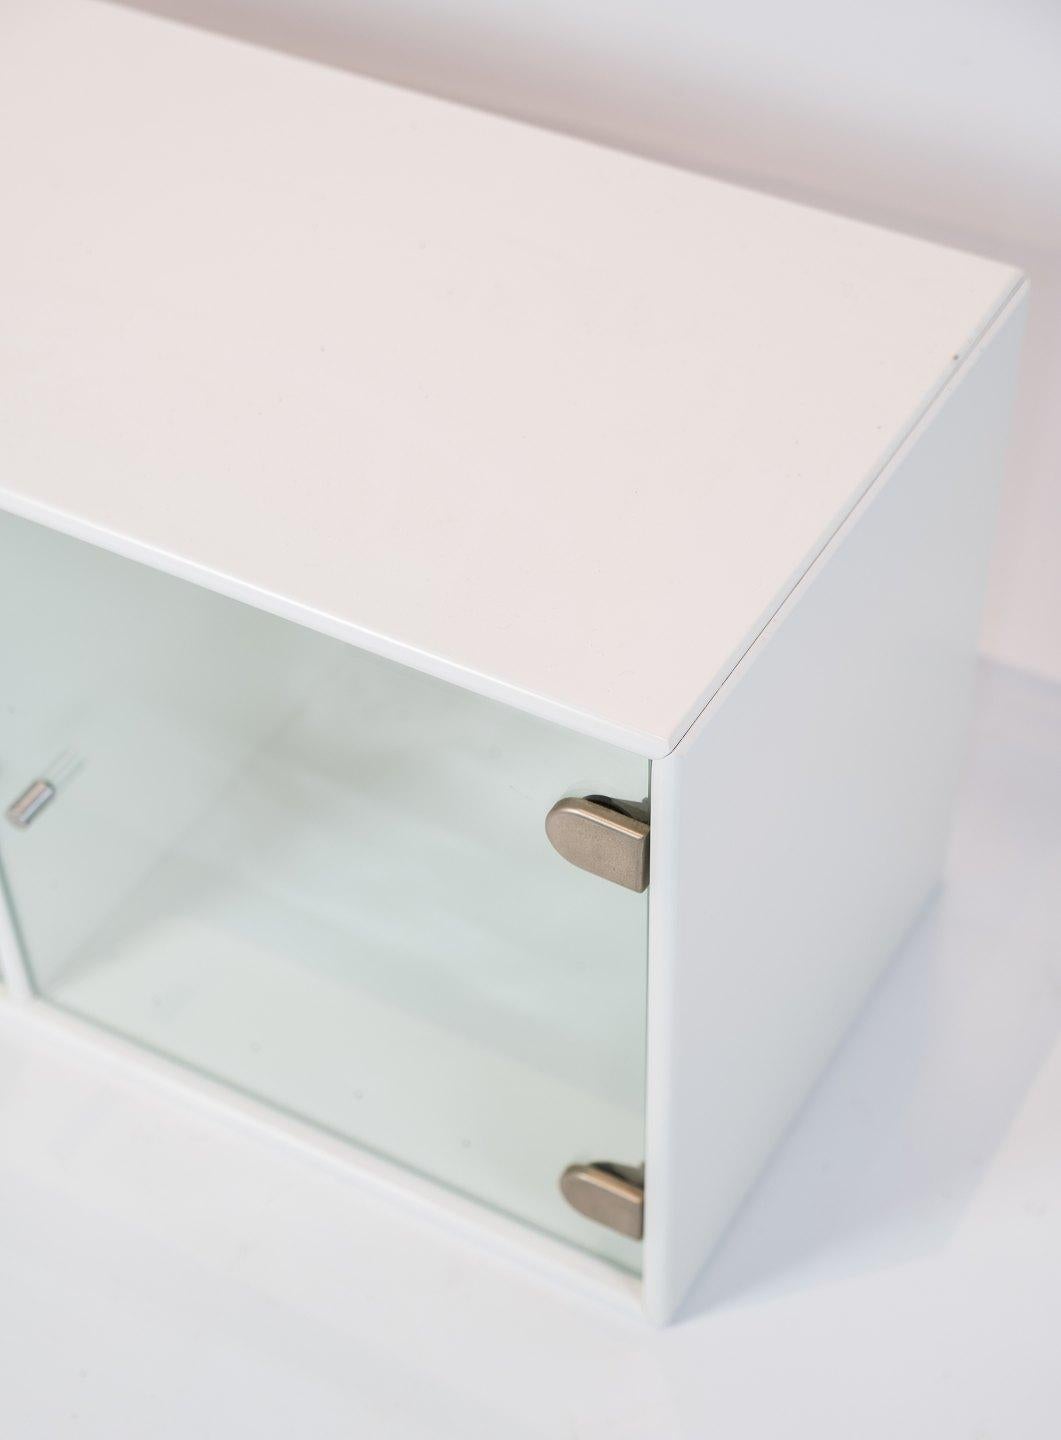 White Montana module with glass doors. We have 3 pieces in stock.